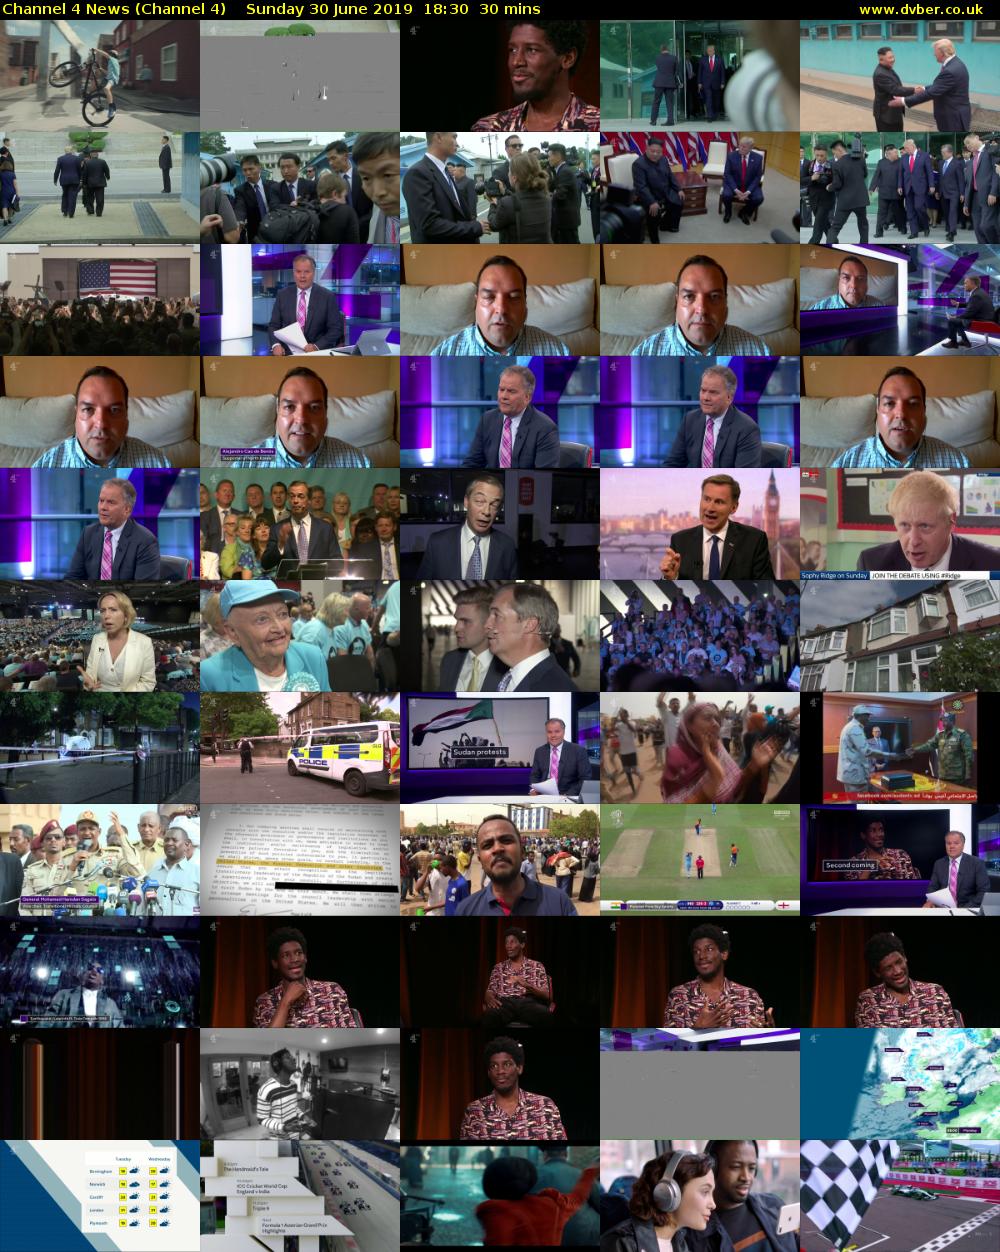 Channel 4 News (Channel 4) Sunday 30 June 2019 18:30 - 19:00